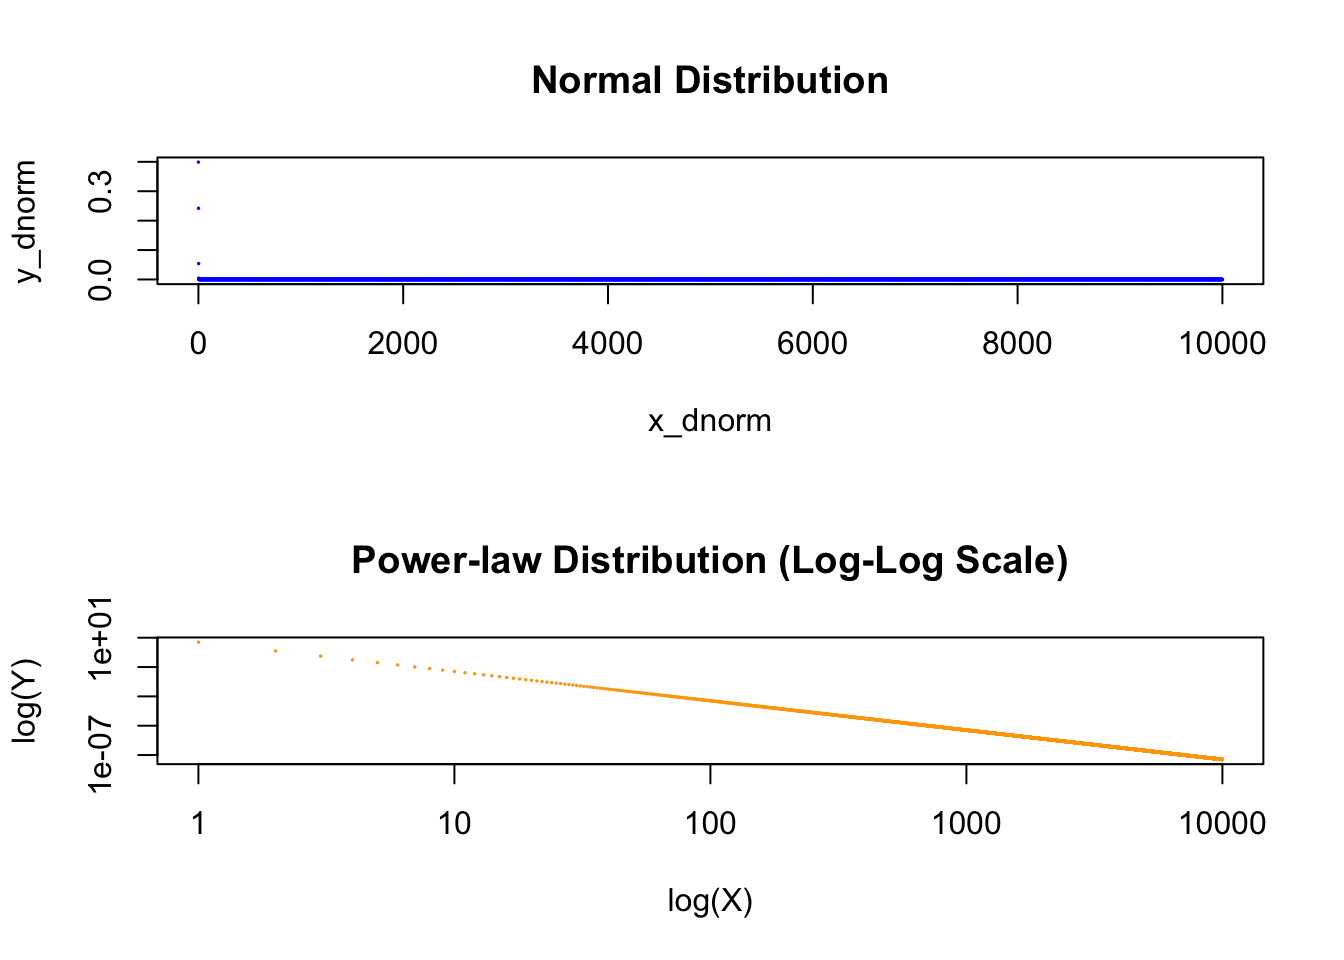 Comparing Normal Distribution and Power-law Distribution Side by Side